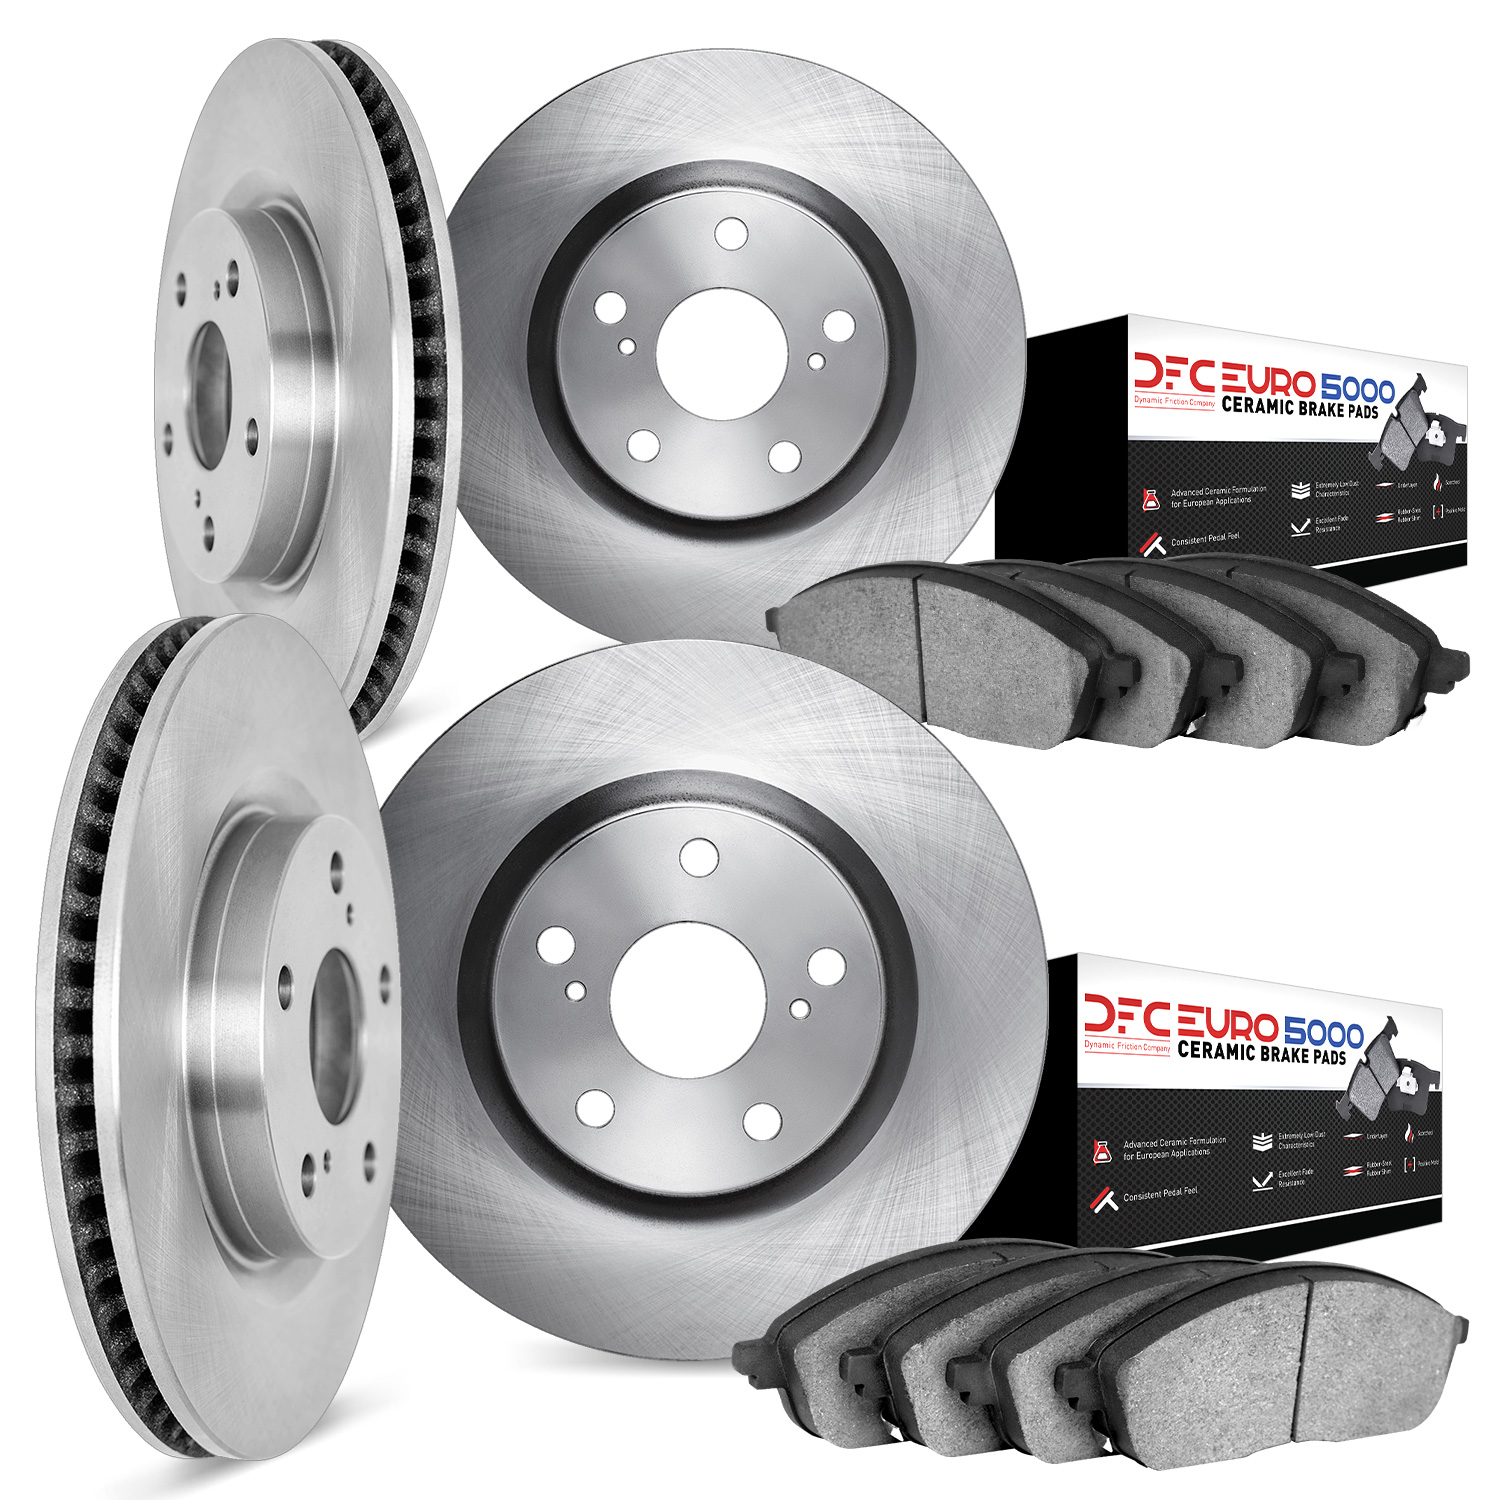 6604-11777 Brake Rotors w/5000 Euro Ceramic Brake Pads, 2009-2015 GM, Position: Front and Rear